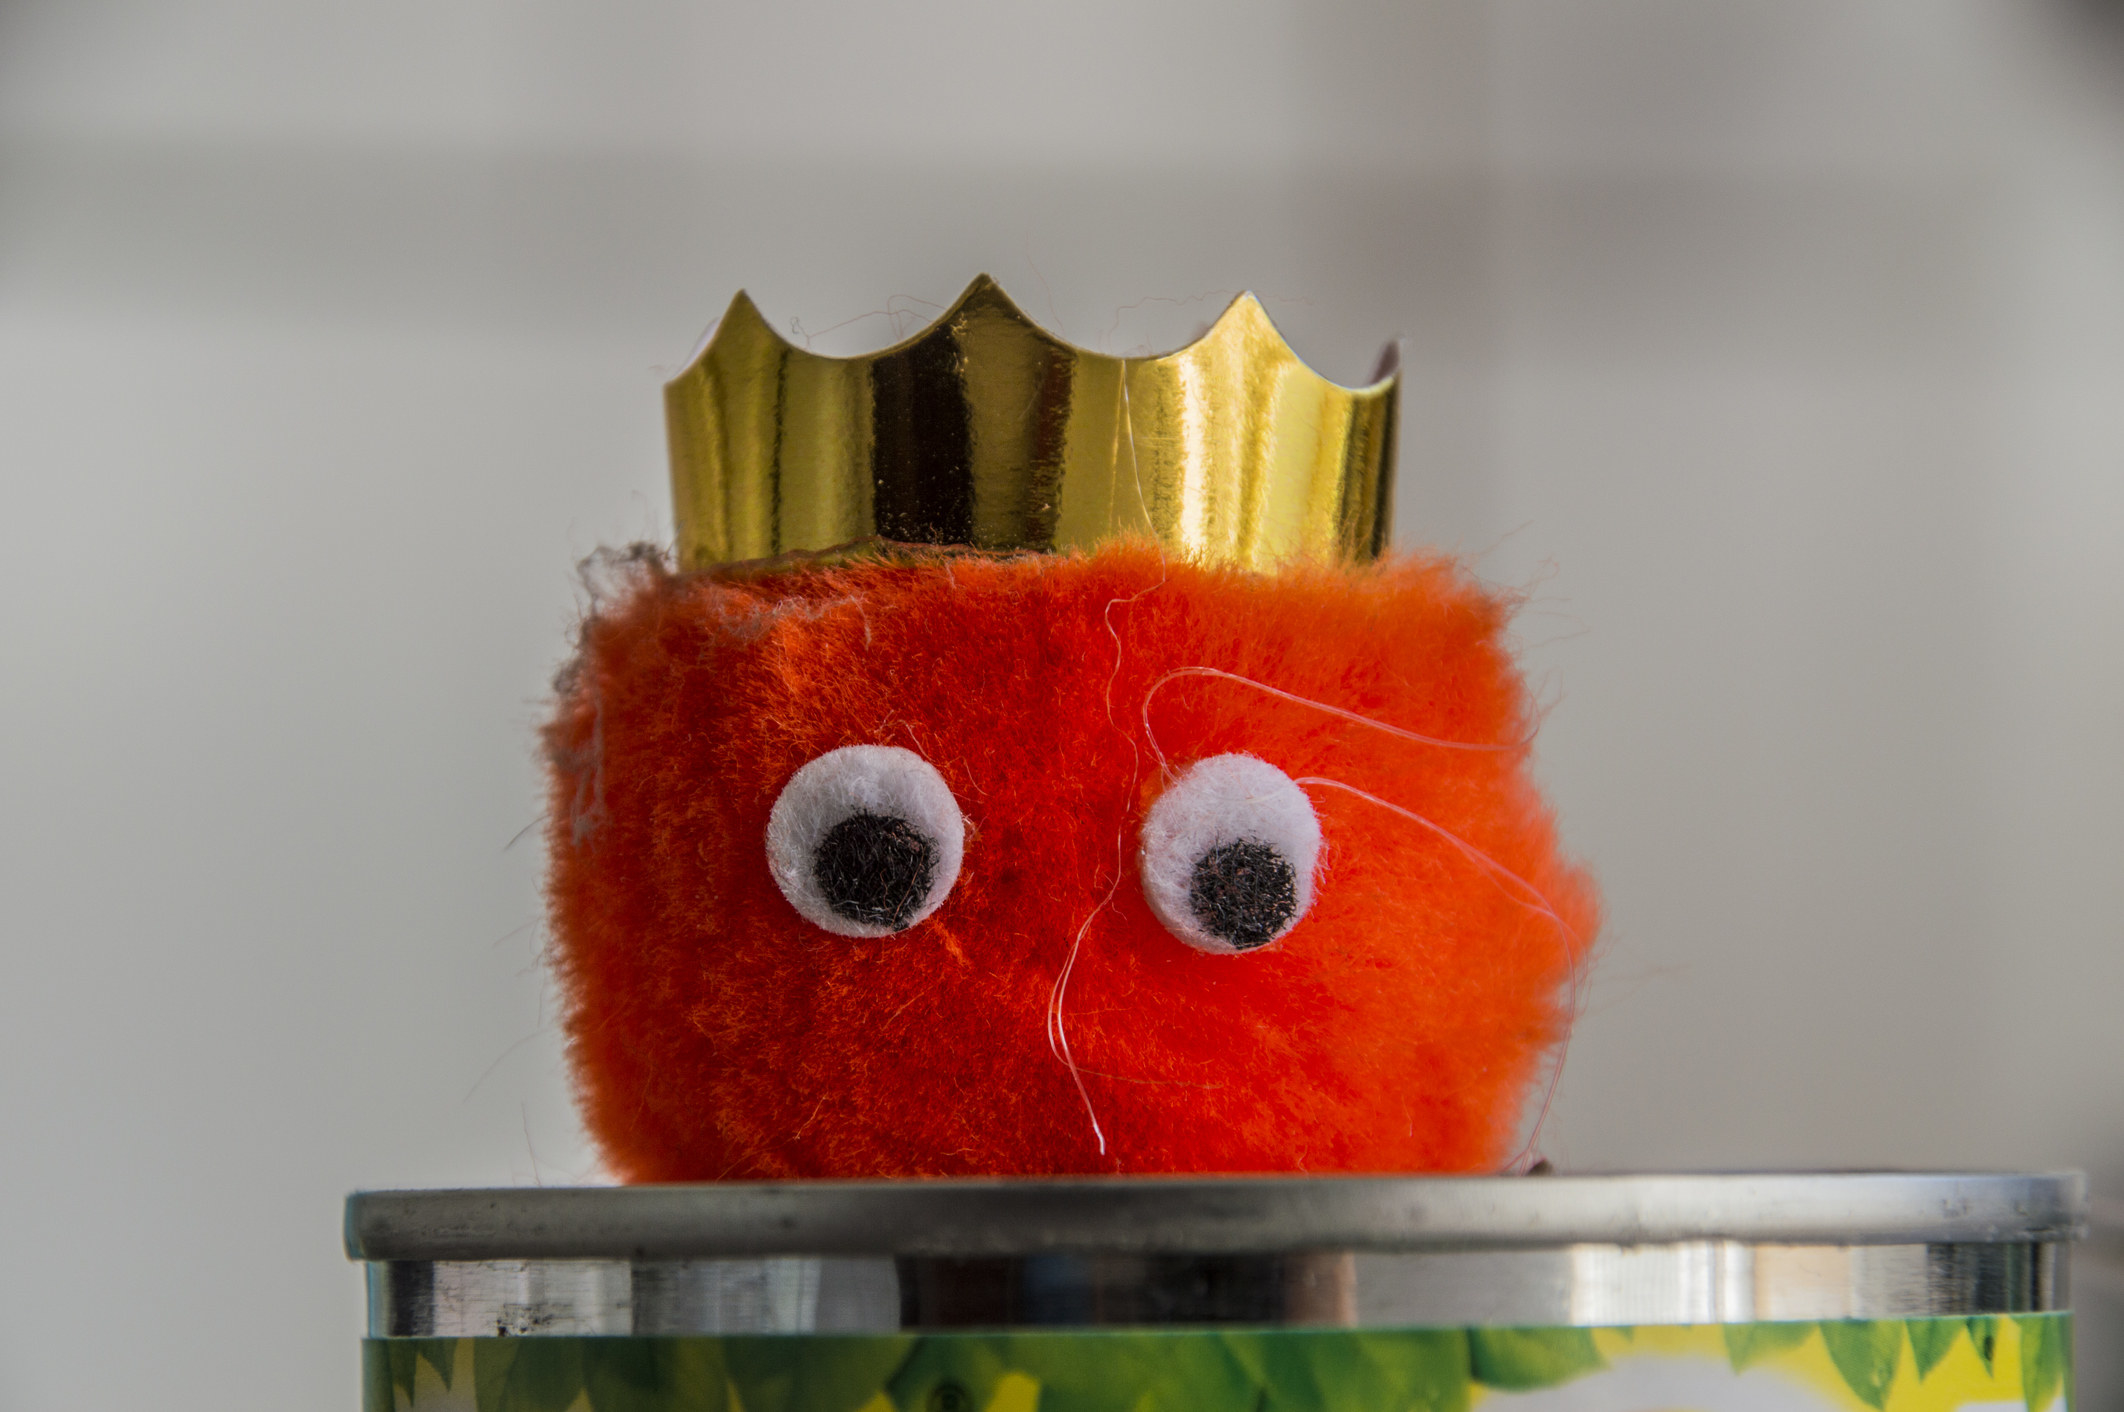 A Weepul with a gold crown